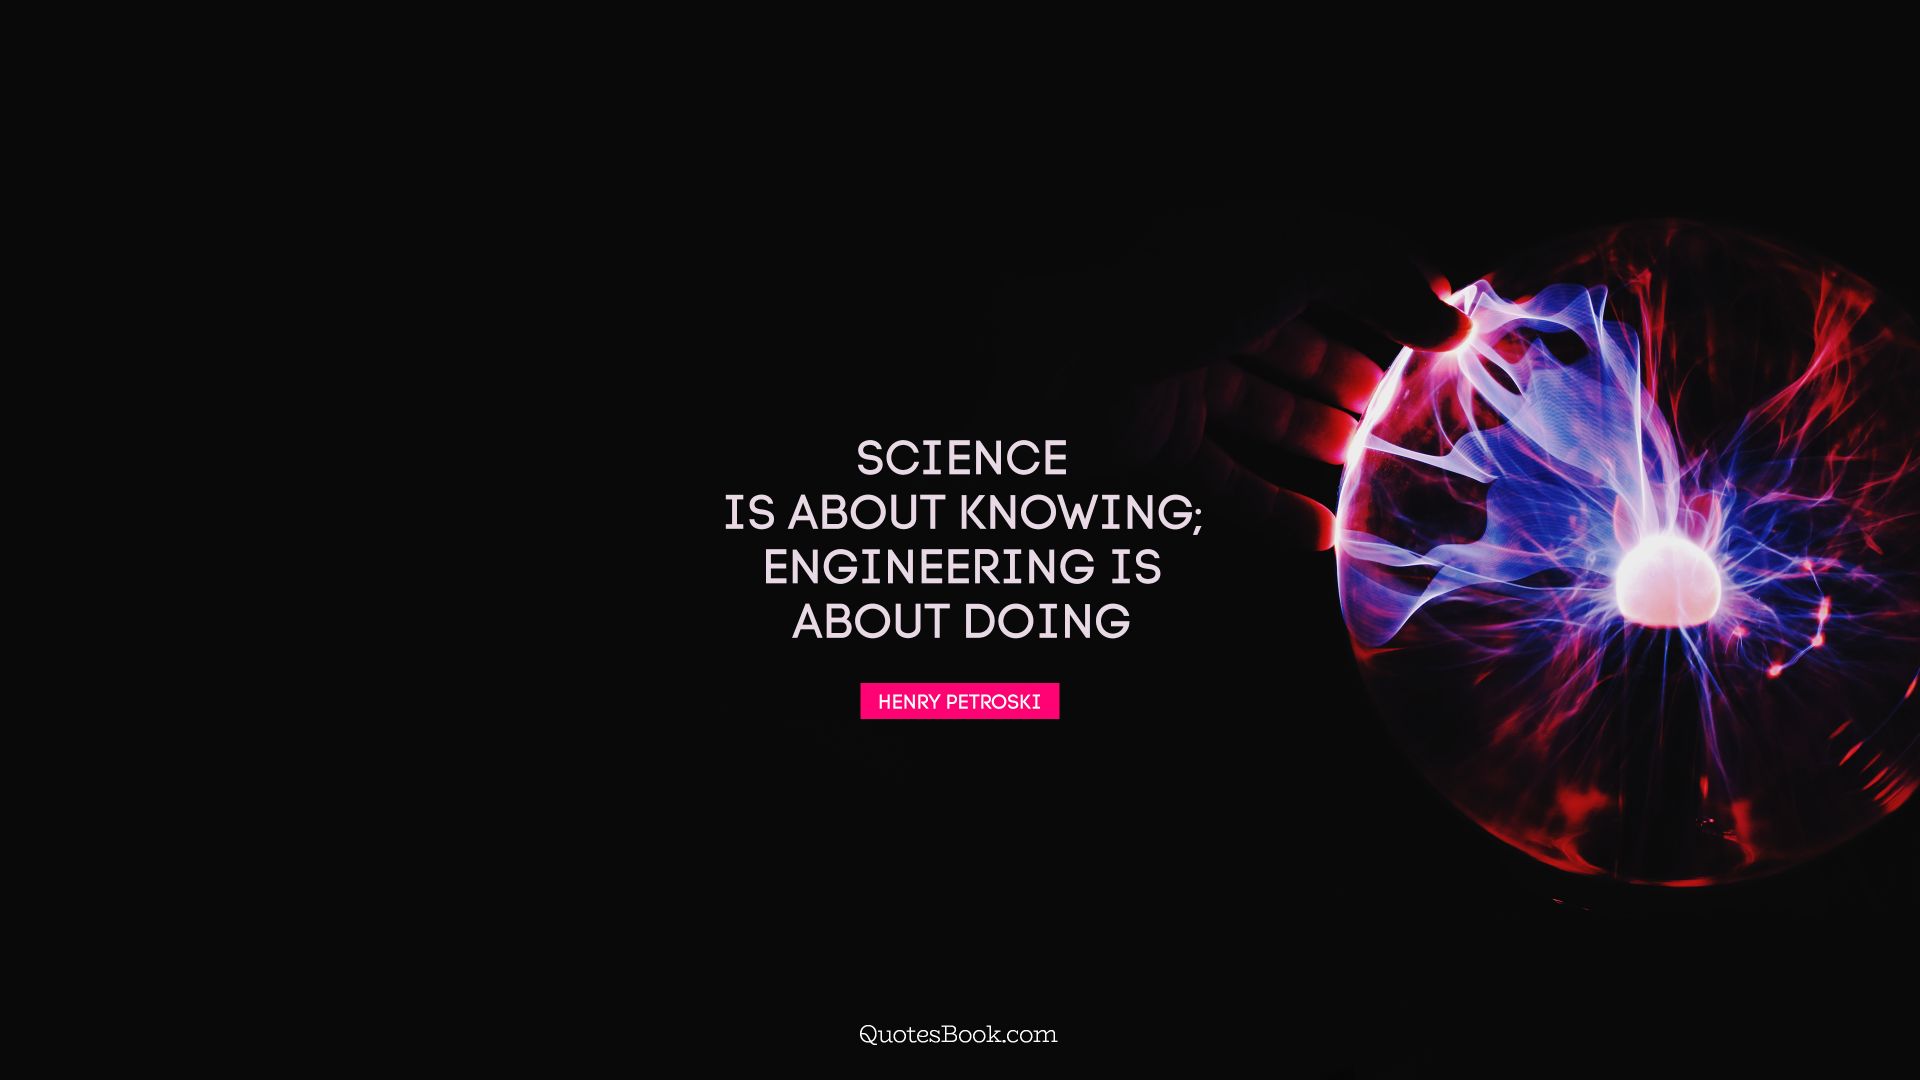 Science is about knowing; engineering is about doing. - Quote by Henry Petroski